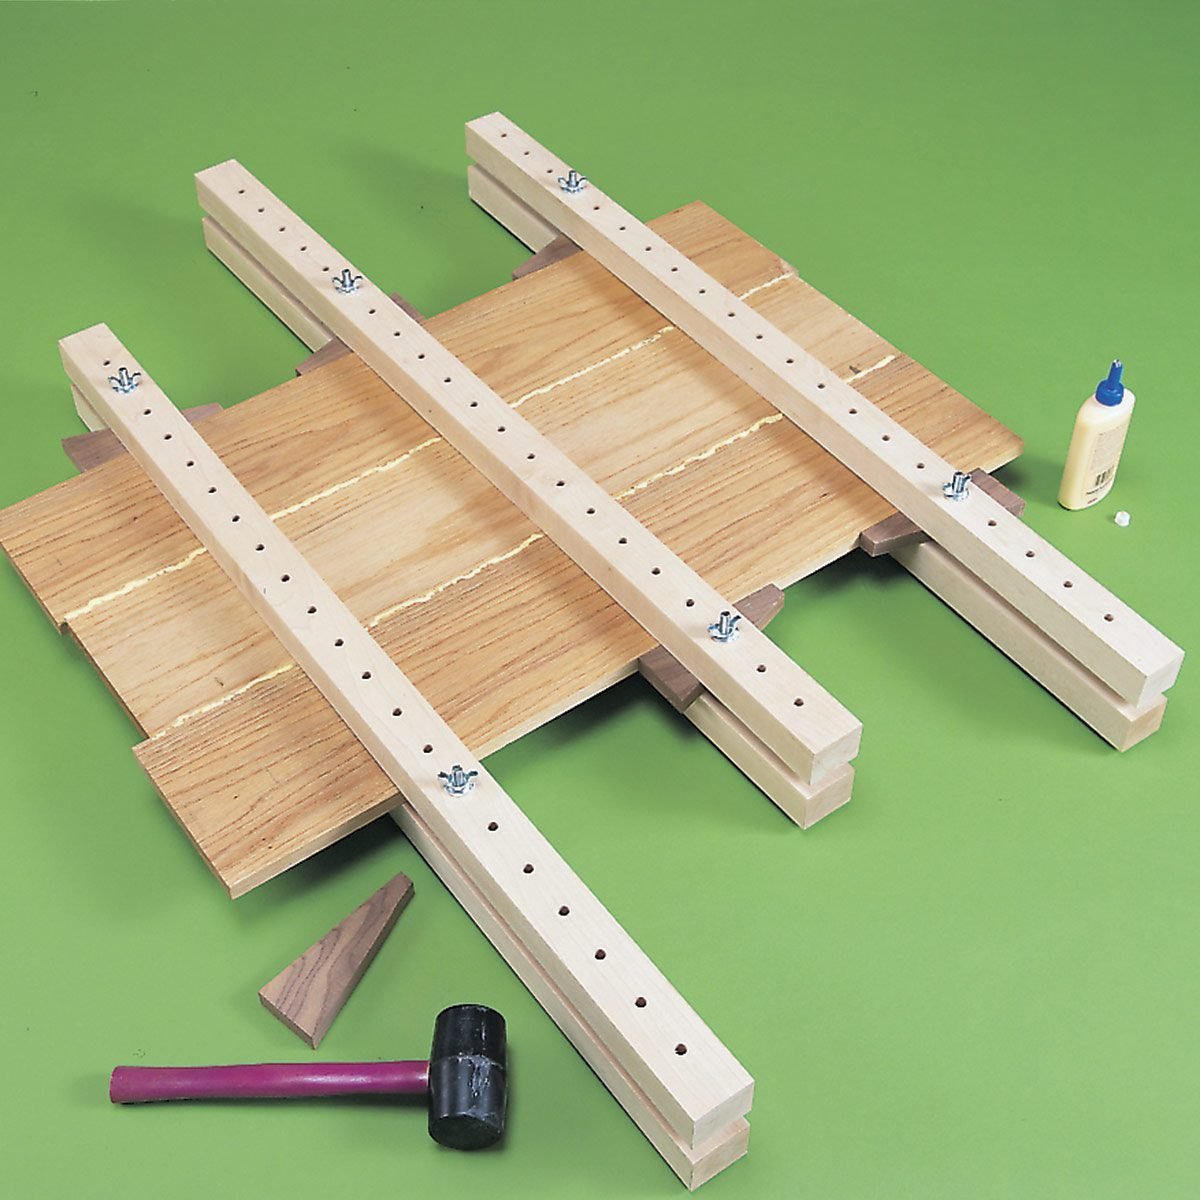 Shop Made Edge Gluing Clamps The Family Handyman